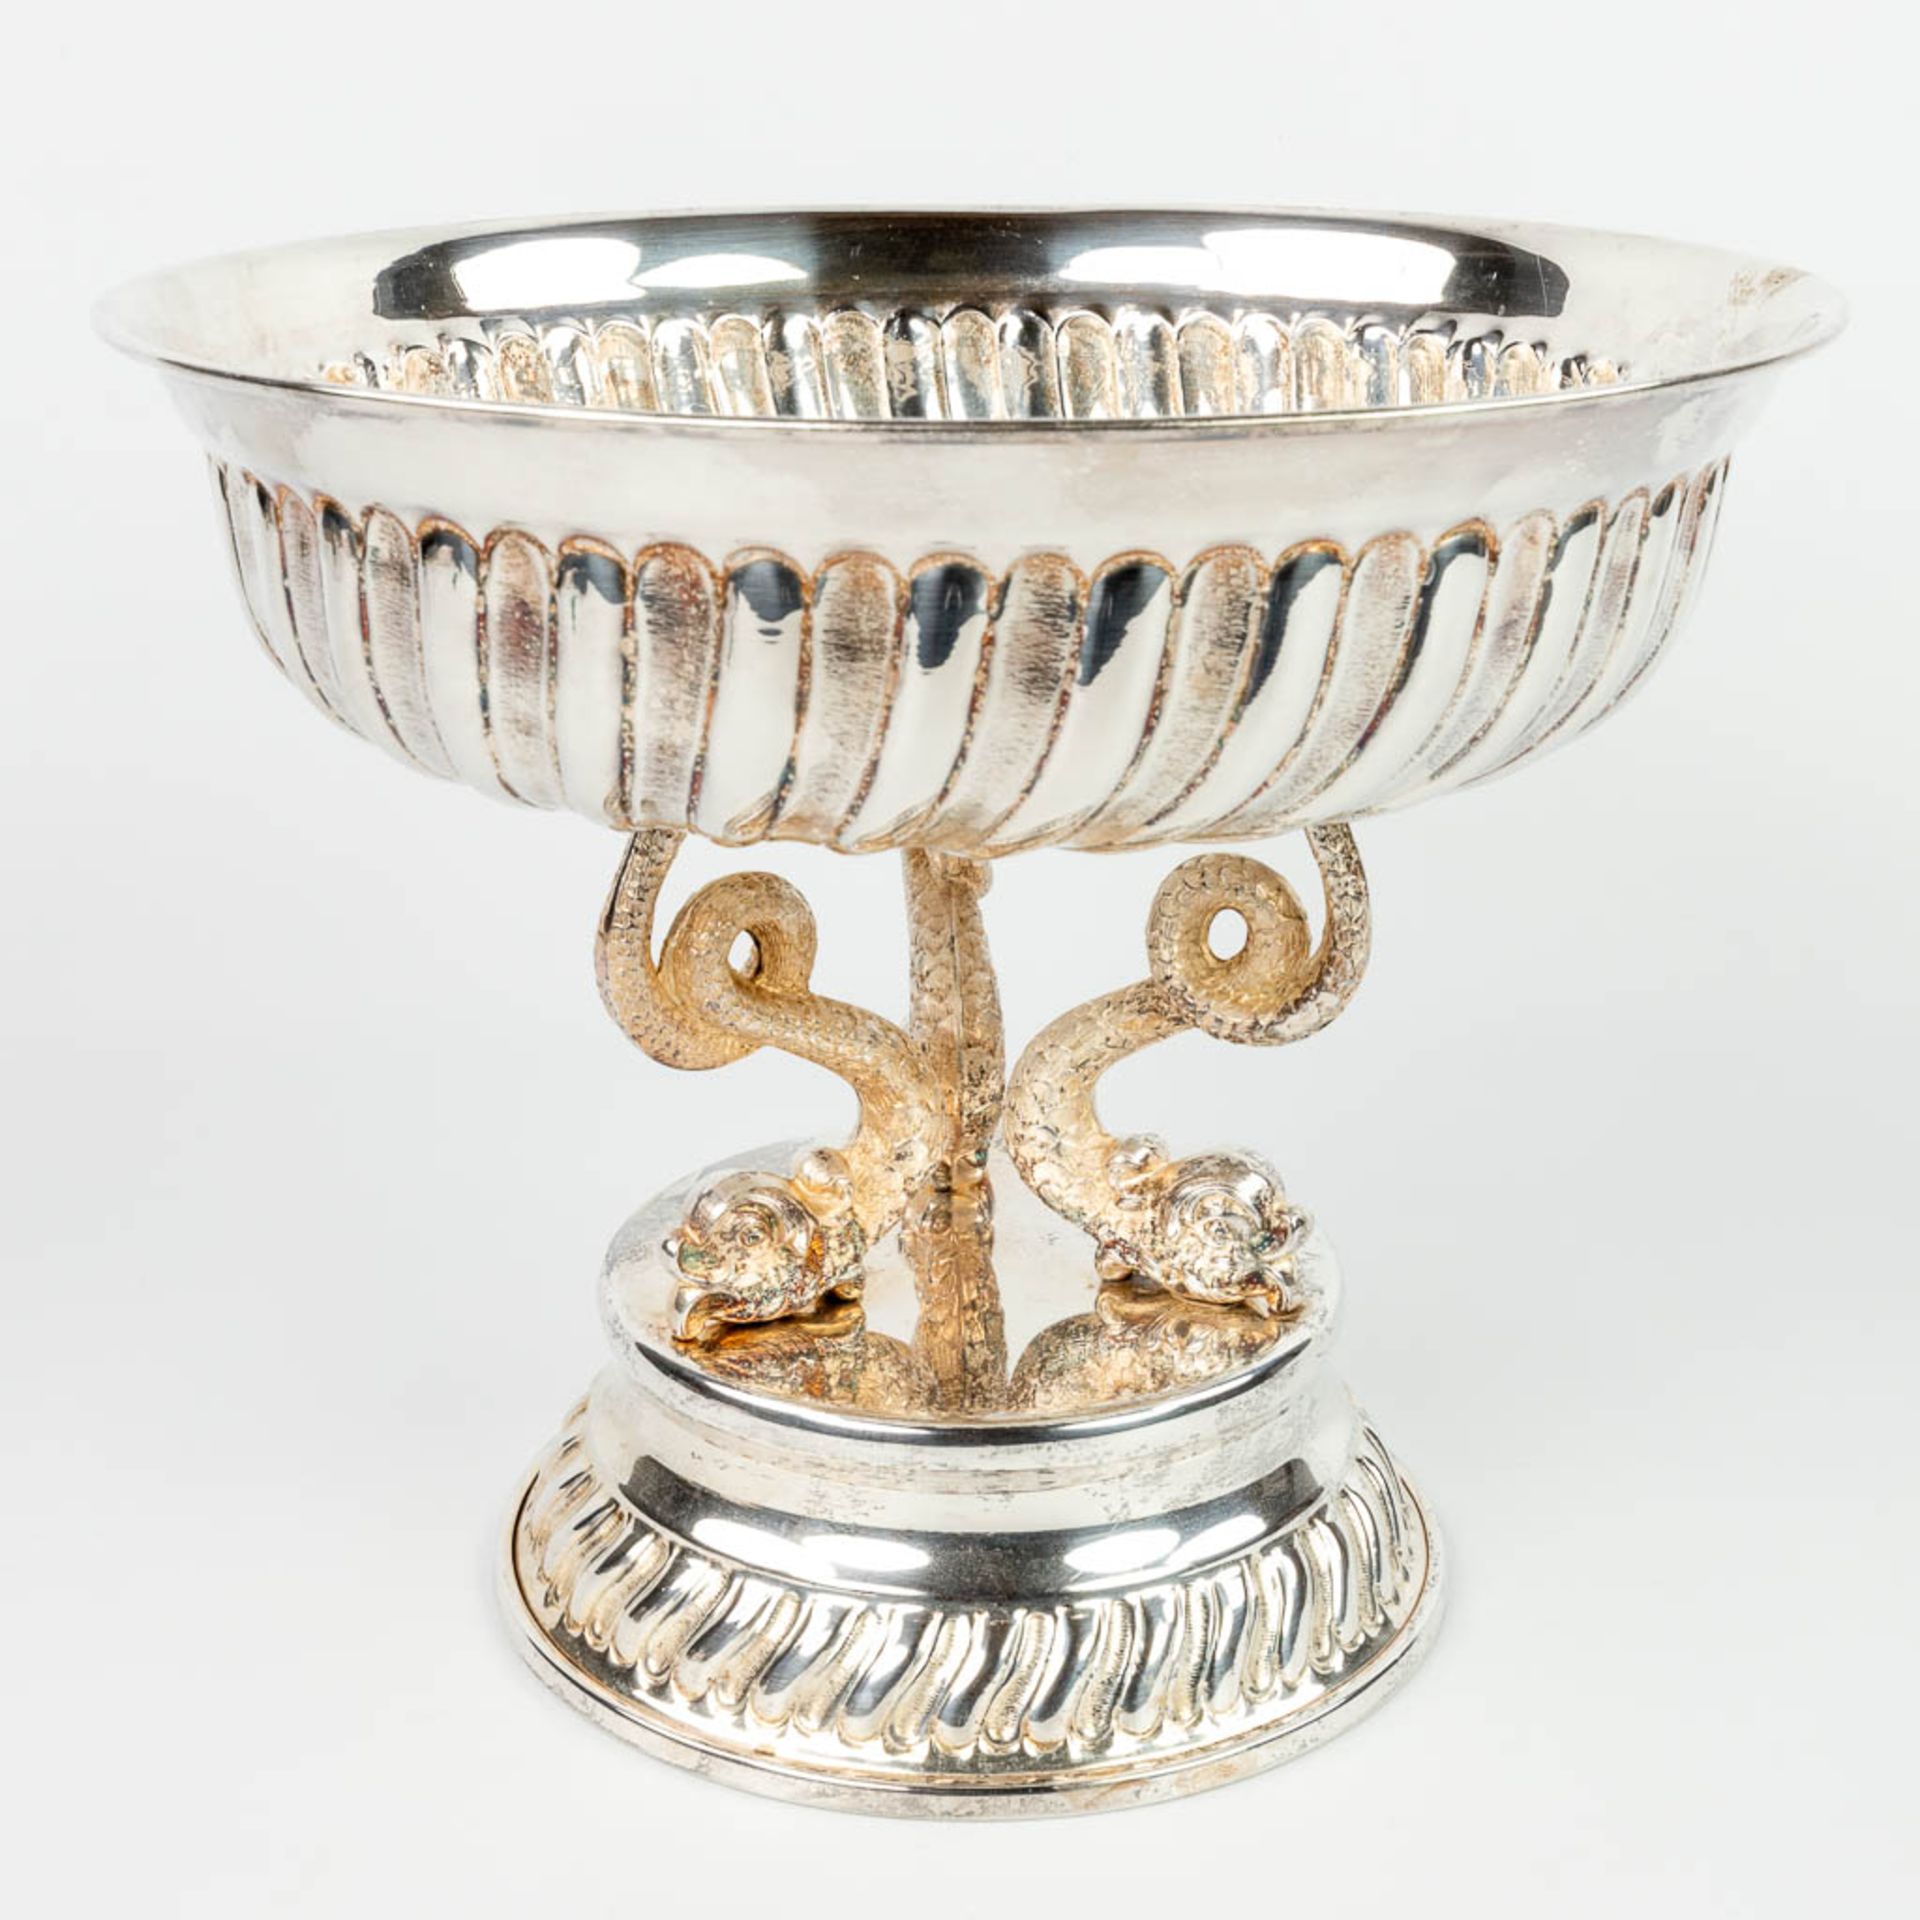 A tazza made of silver-plated metal and decorated with fish figurines. 20th century, not stamped. 15